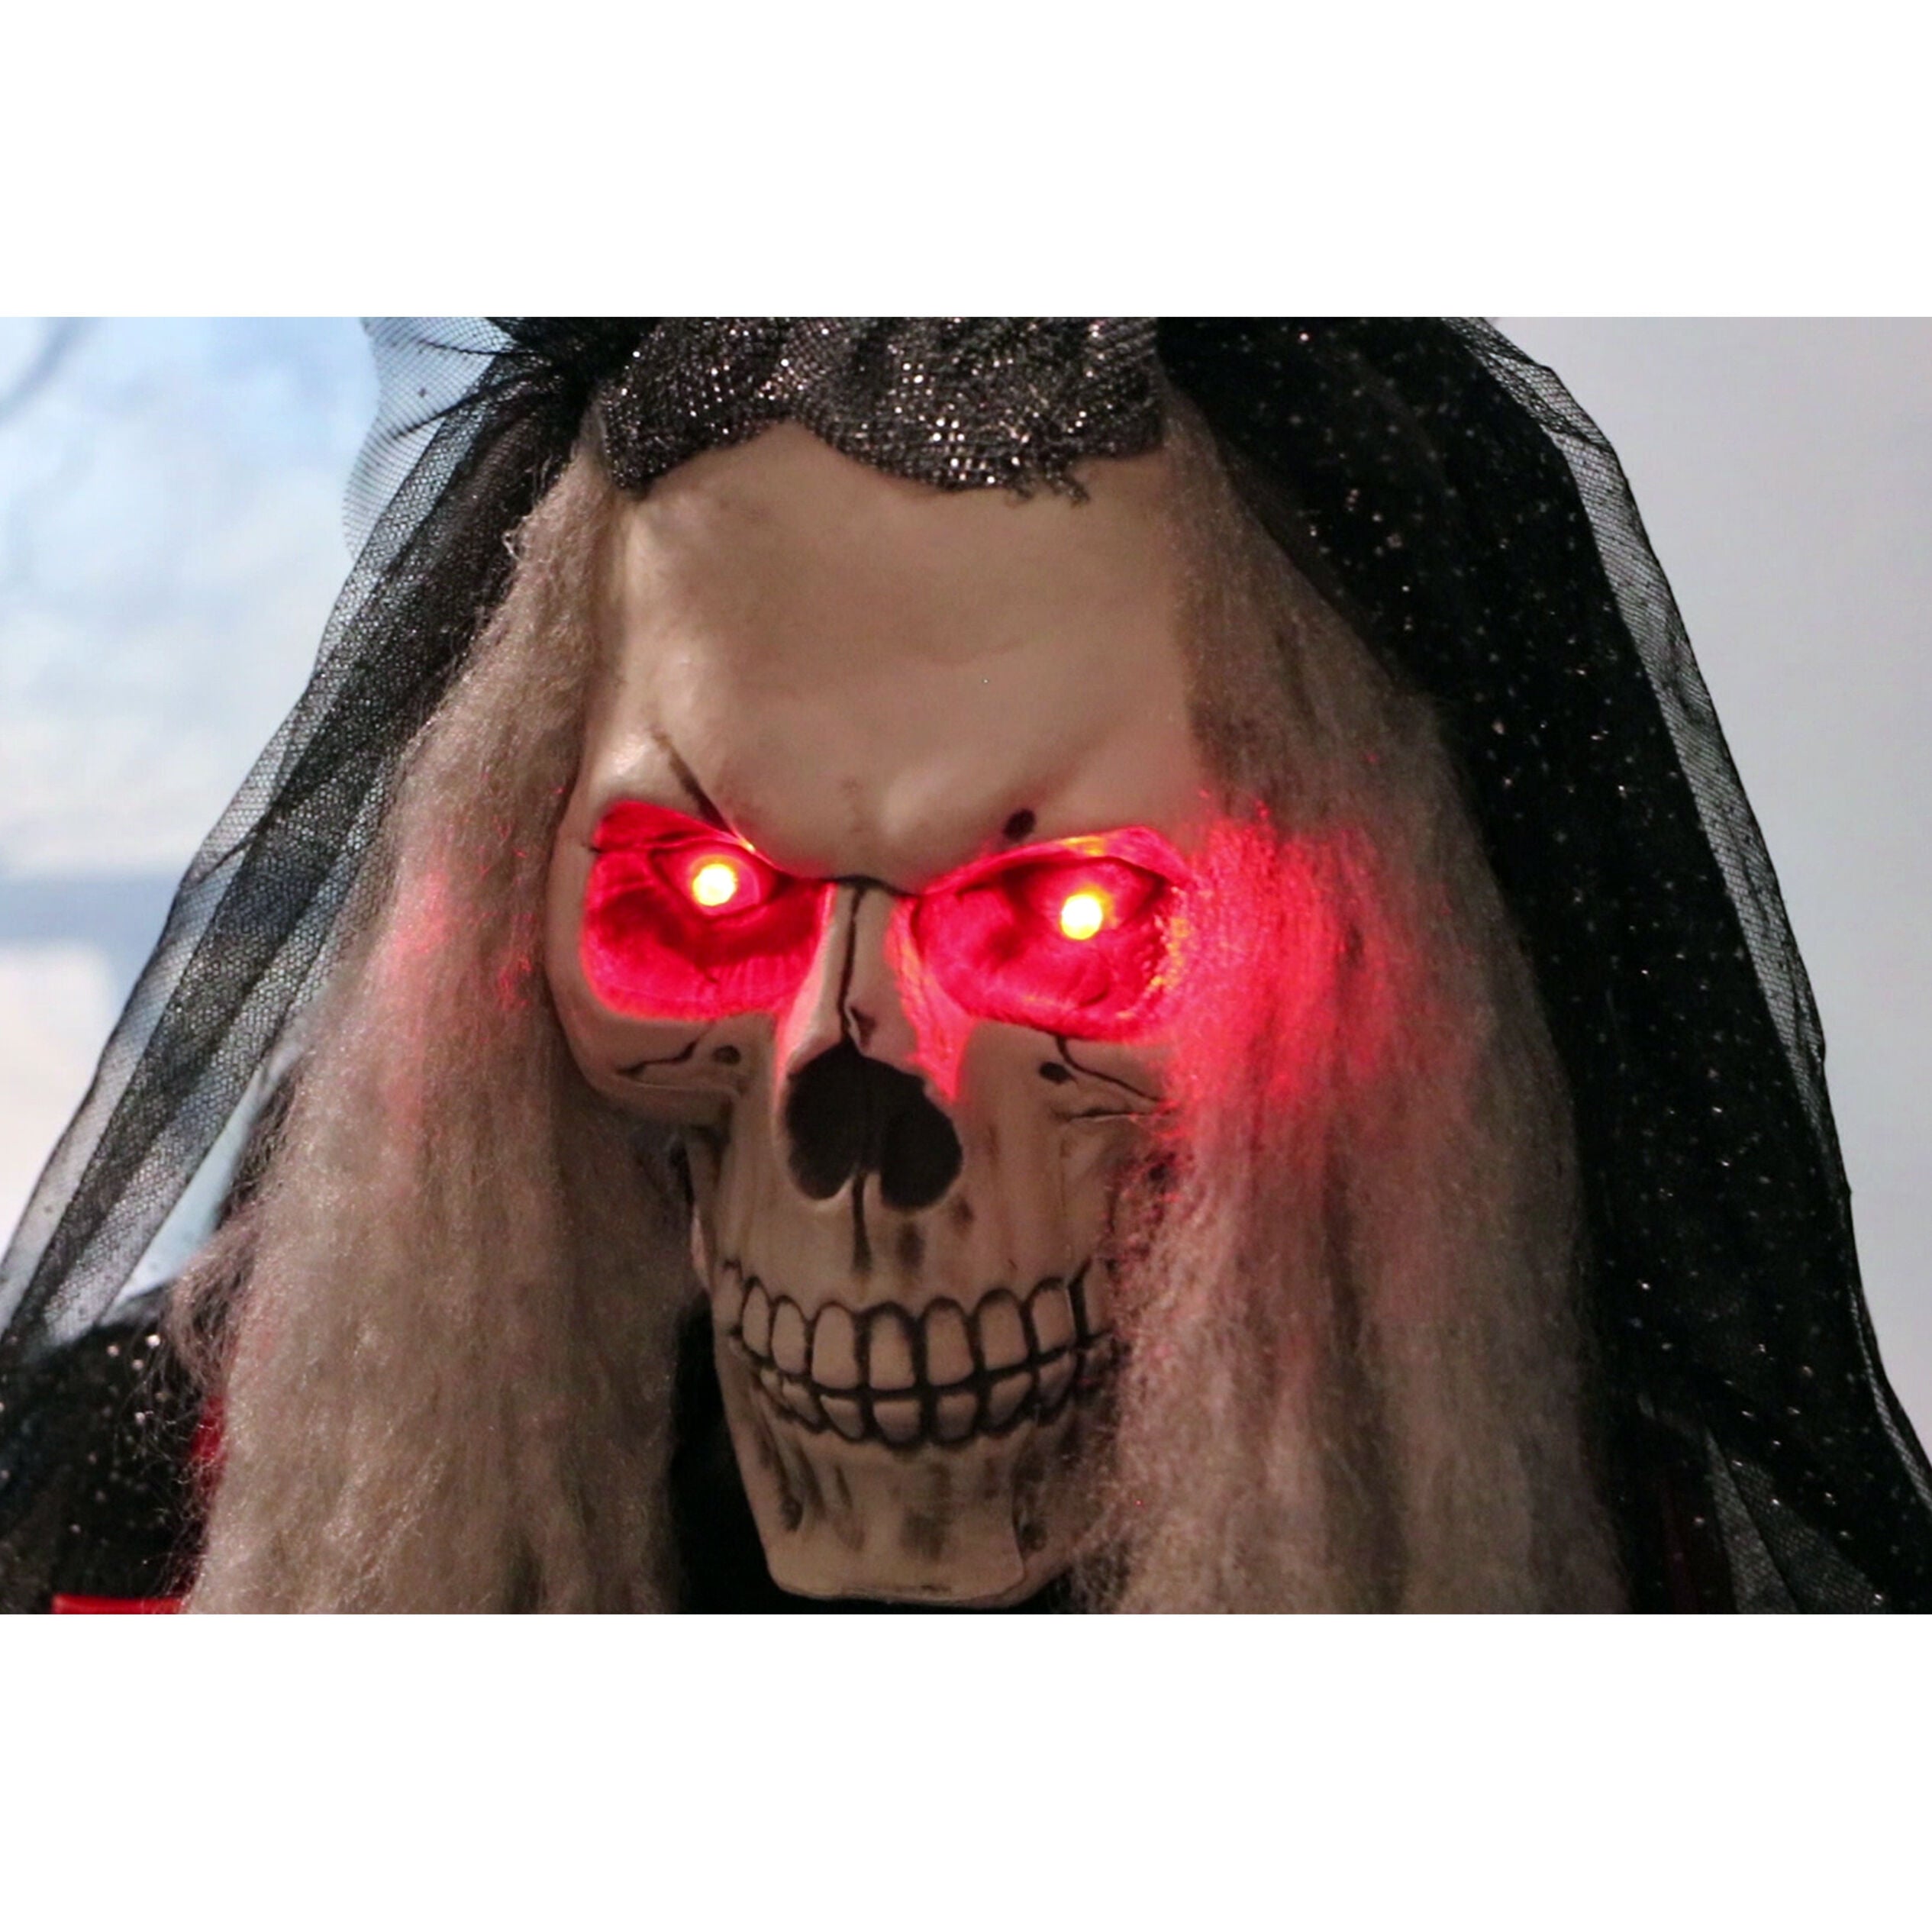 Haunted Hill Farm -  65-In. Mona the Moaning Skeleton Bride, Indoor or Covered Outdoor Halloween Decoration, Red LED Eyes